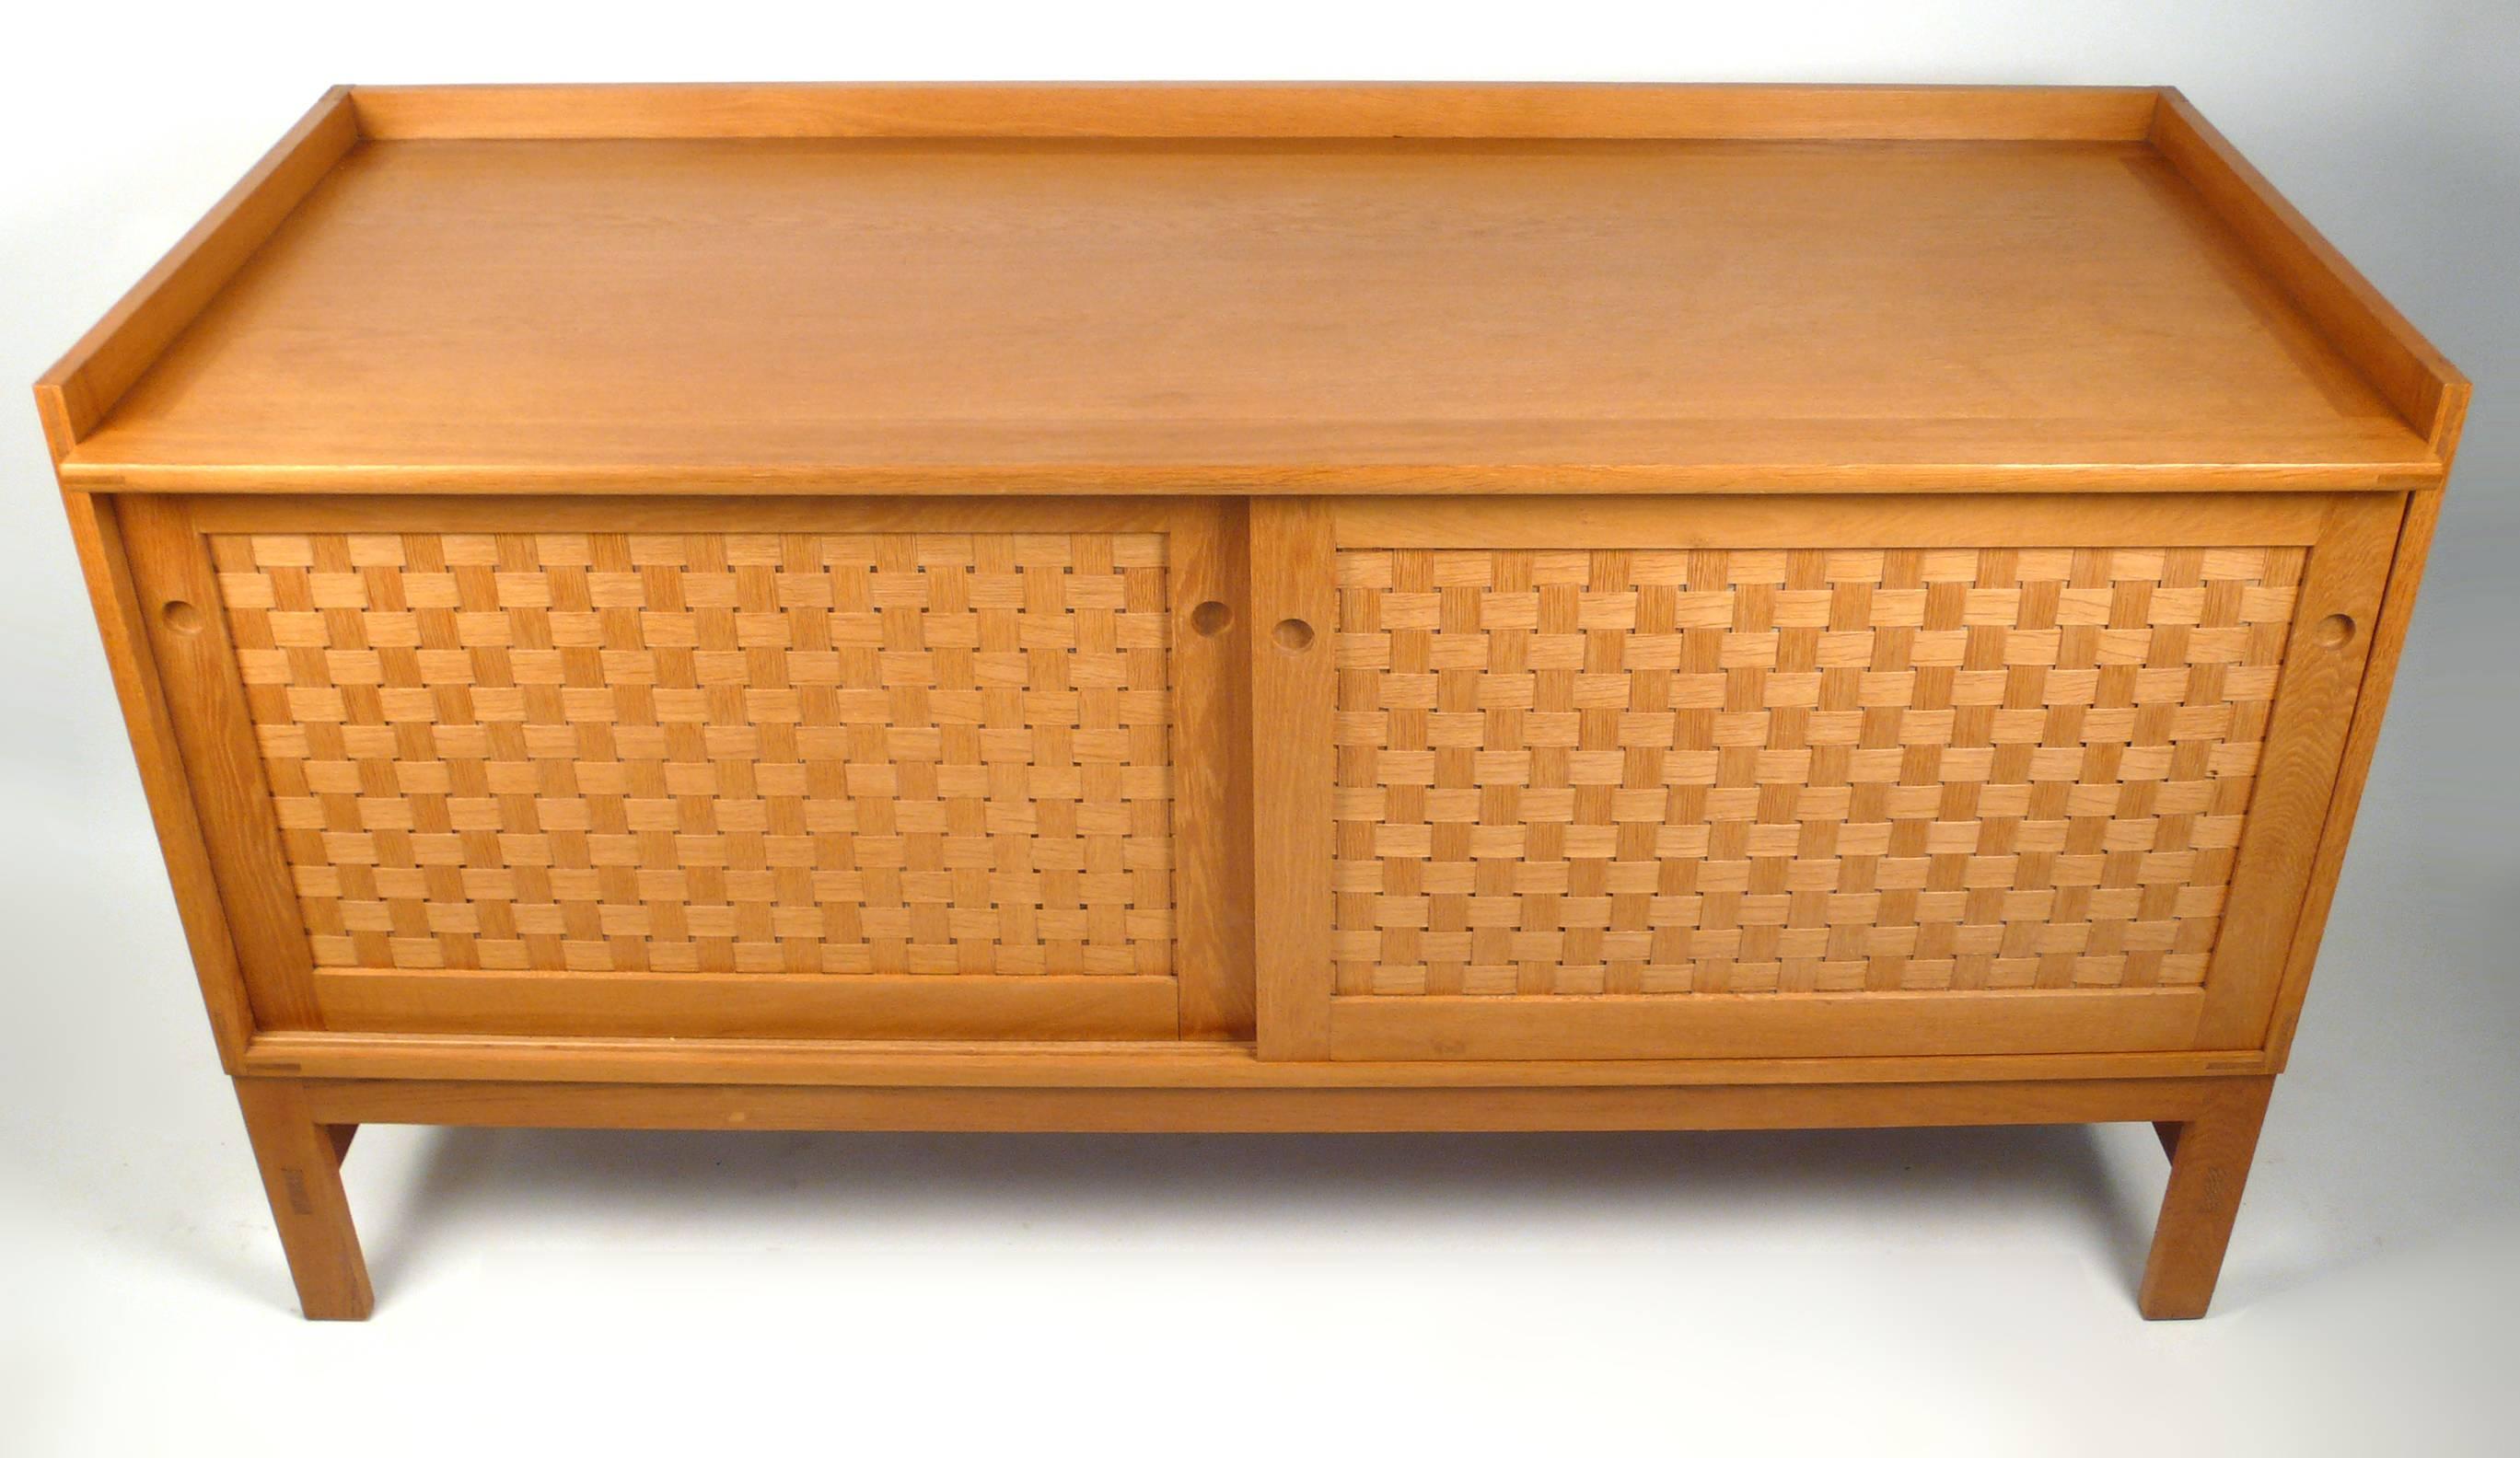 A fine and rare Danish modern oak sideboard designed by Ilse Rix for Uldum Møbelfabrik. This piece is generously proportioned and the woven front sliding doors open to reveal a series of finger jointed sliding drawers, some of which are lined in